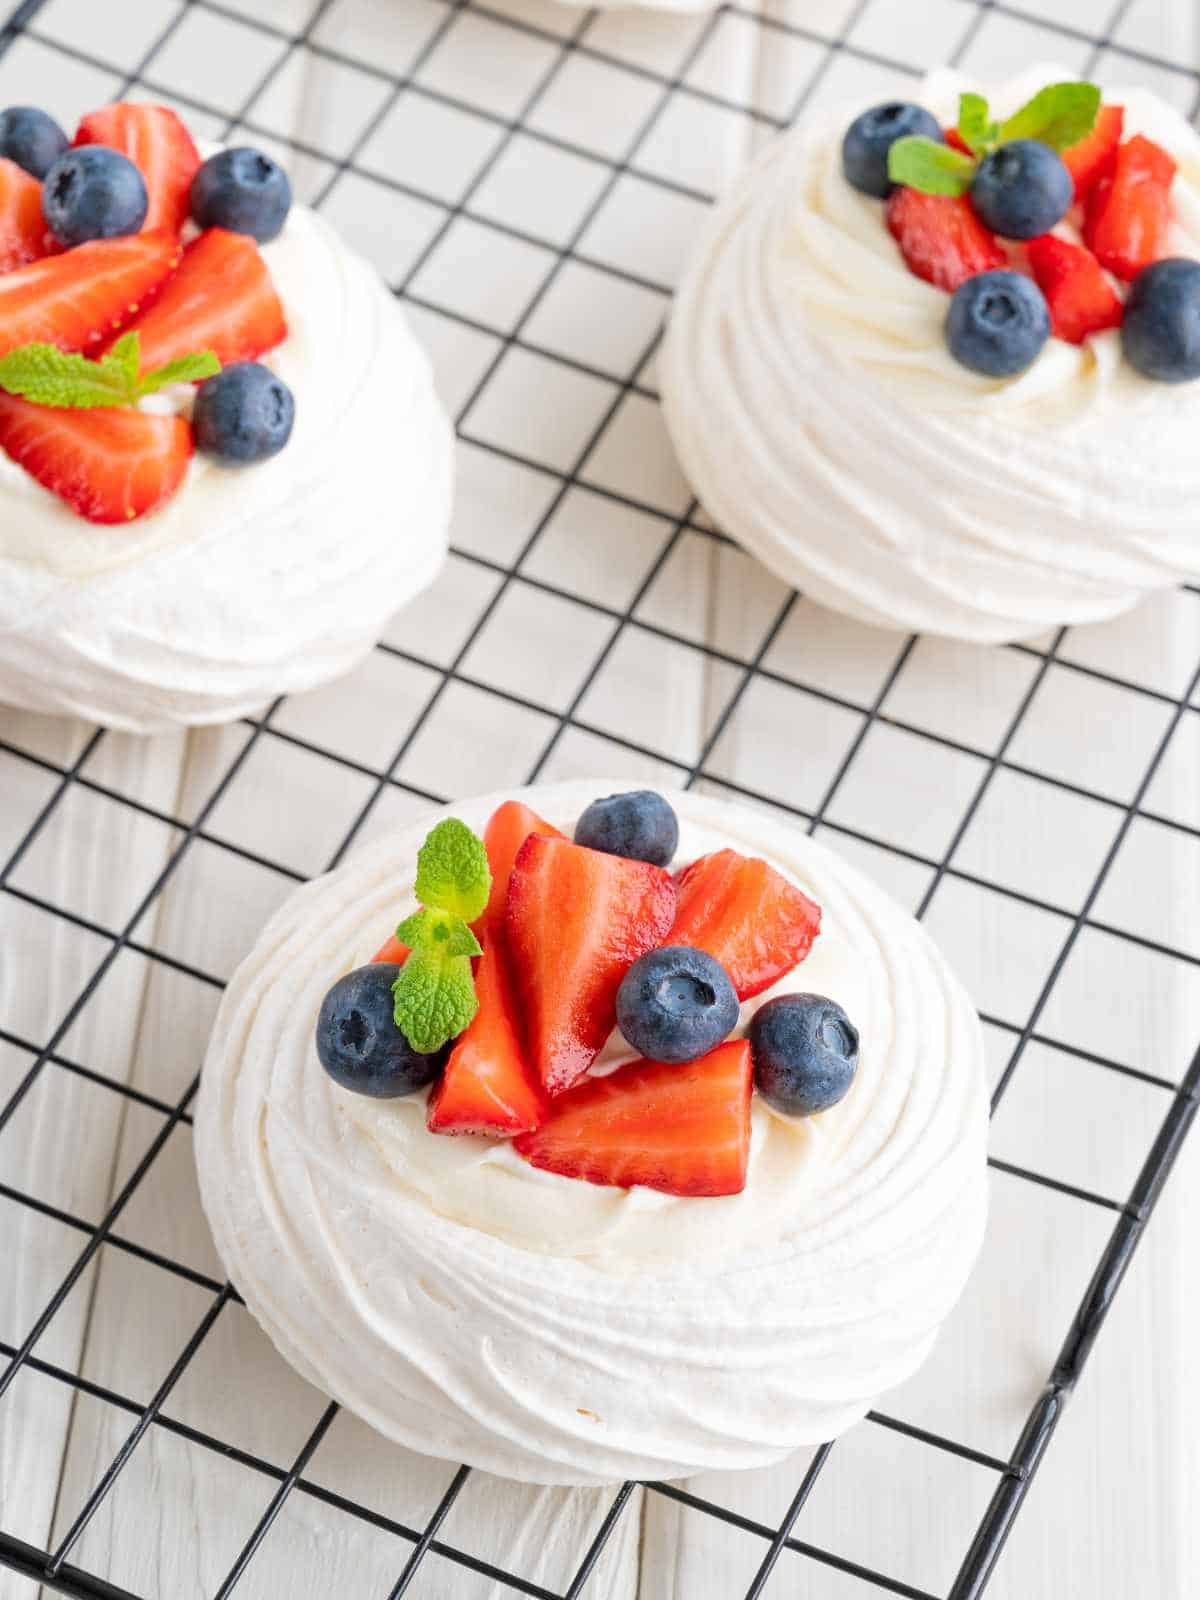 Filled mini pavlova nests with whipped cream and topped with strawberries and blueberries.